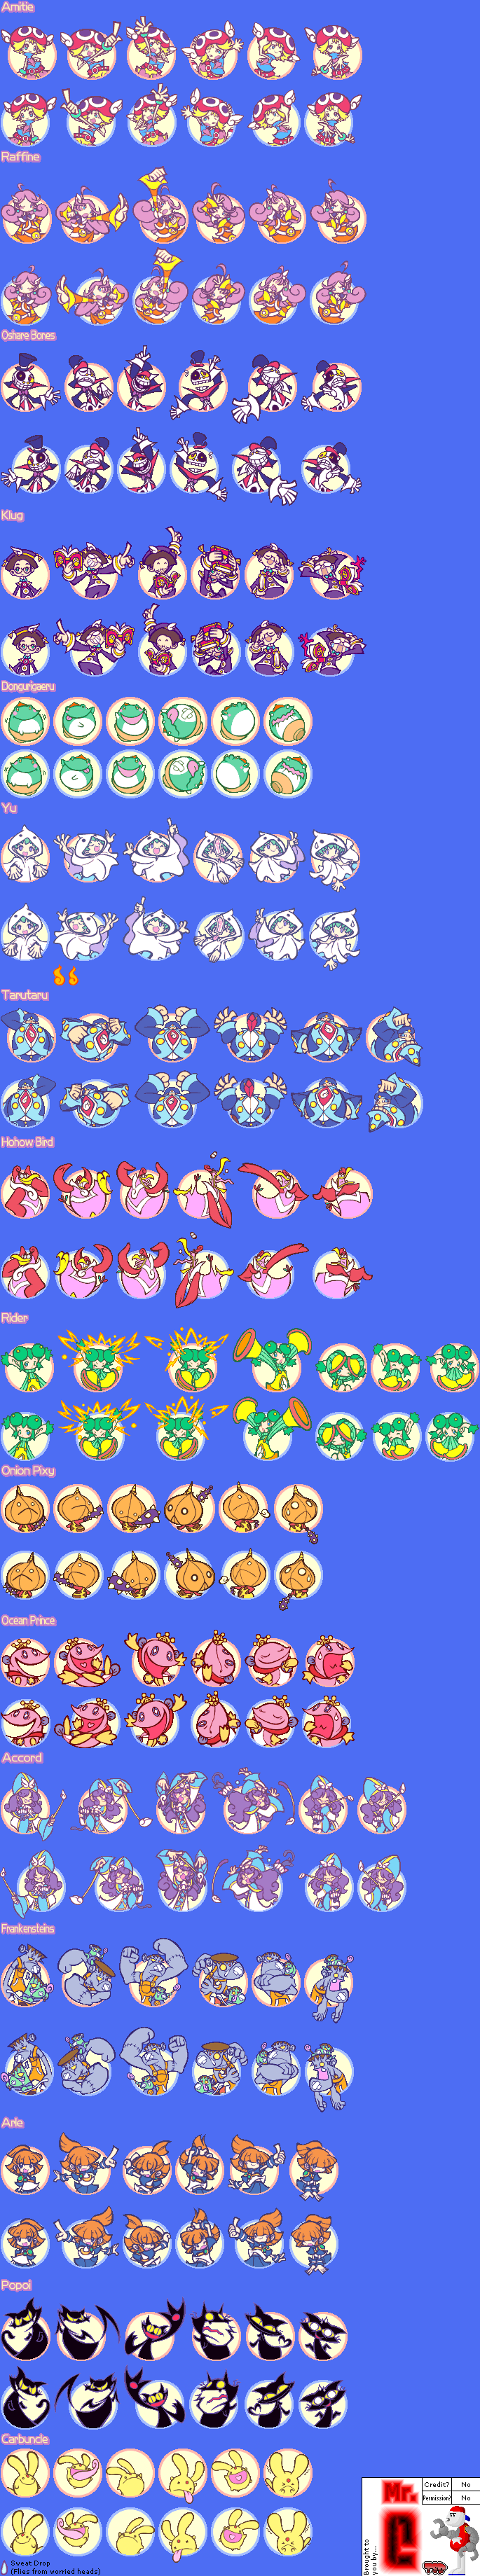 Puyo Pop Fever - Character Heads